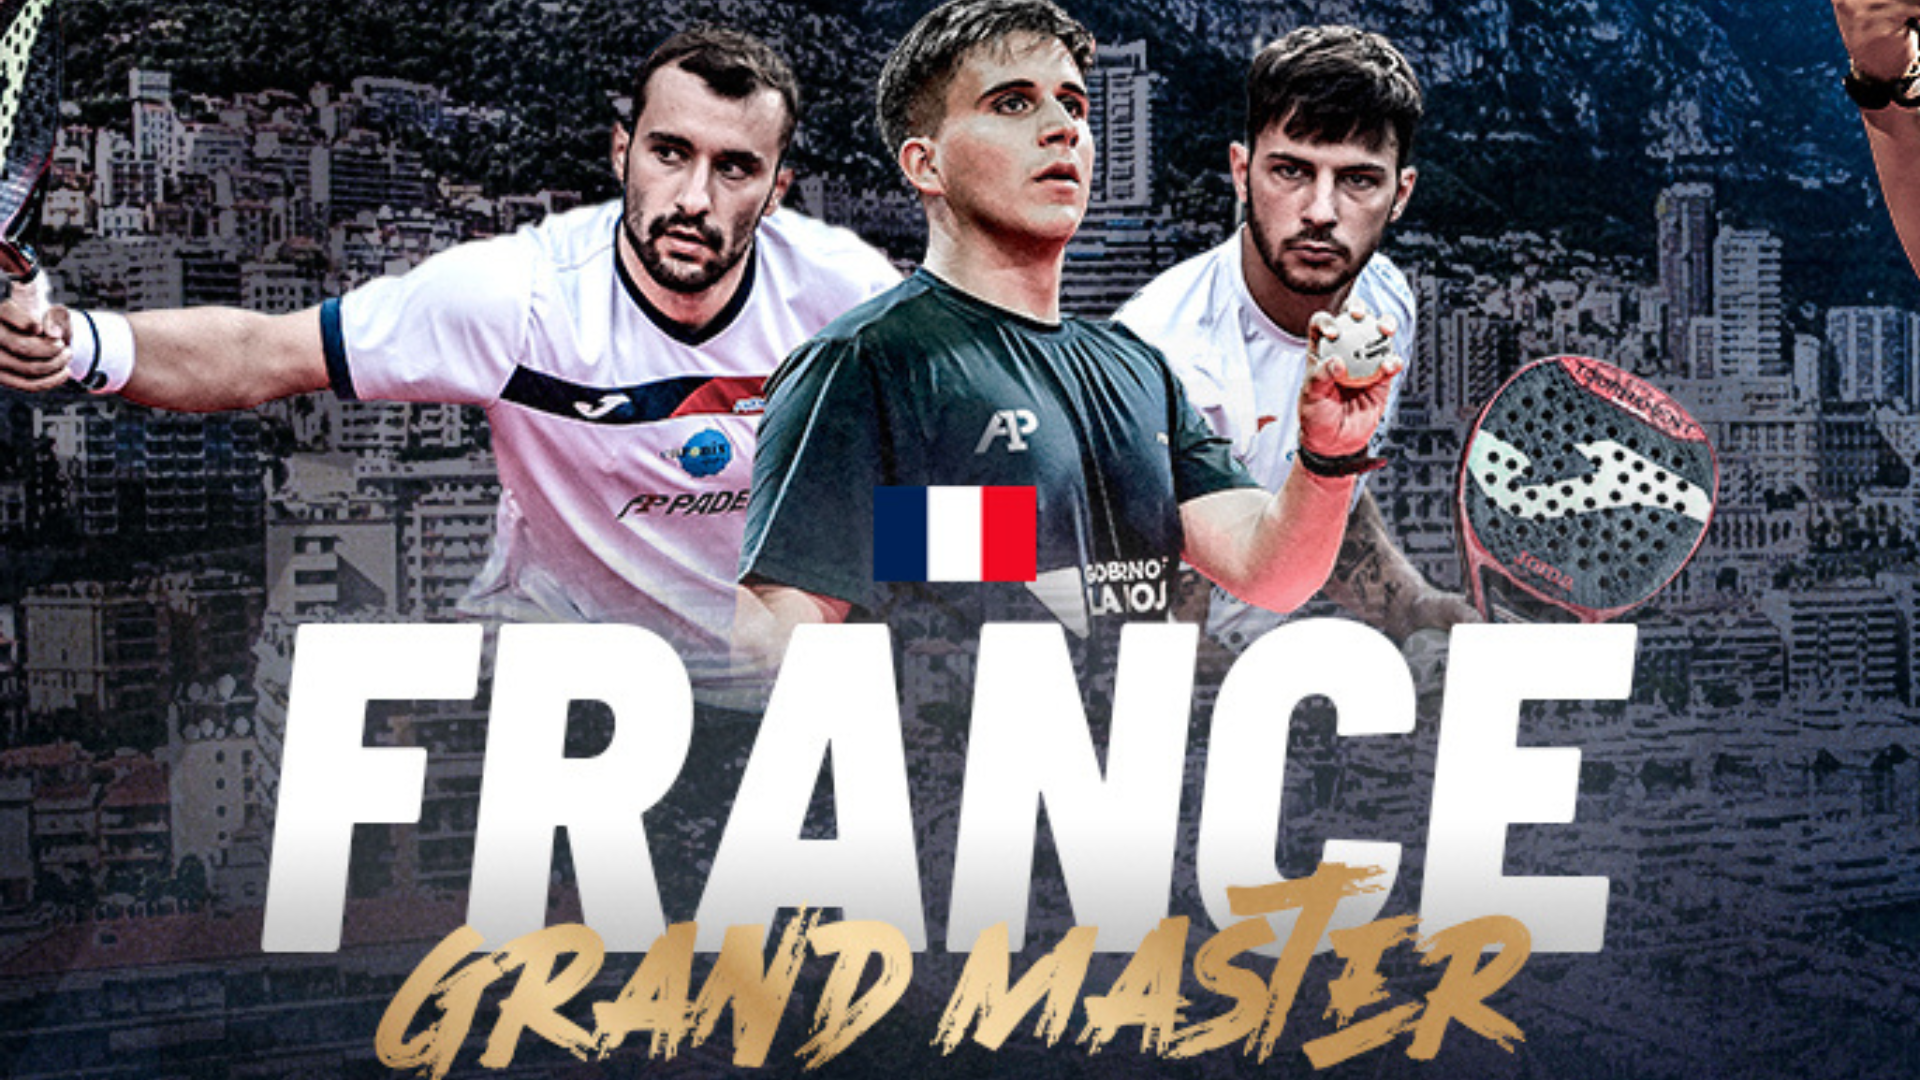 D-1 before the start of the A1 Padel France Grand Master